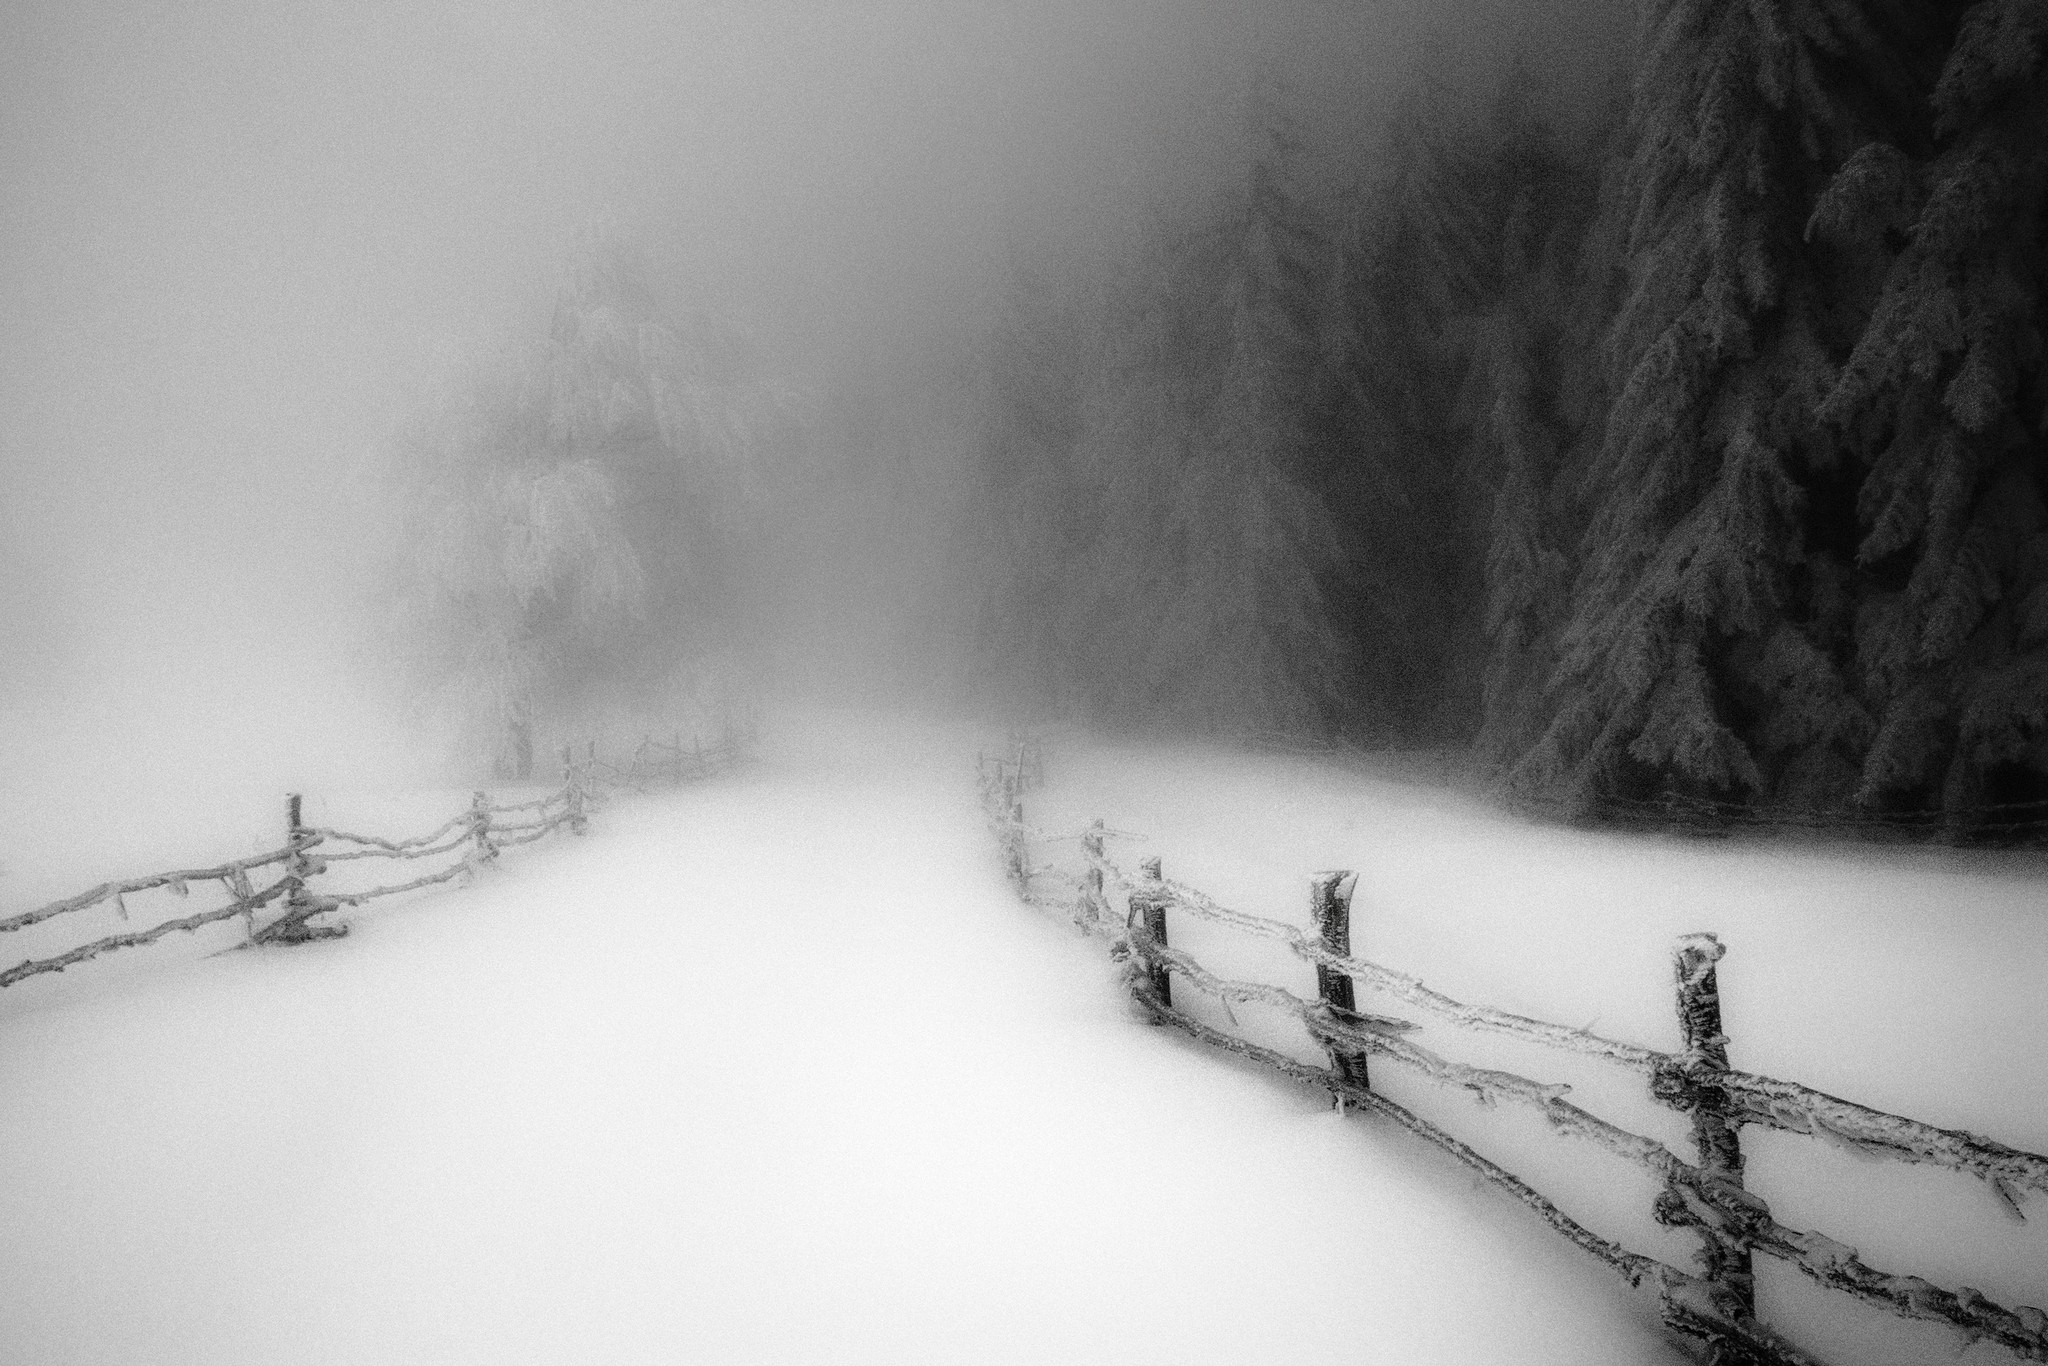 General 2048x1366 nature winter morning snow forest fence cold monochrome path trees daylight mist